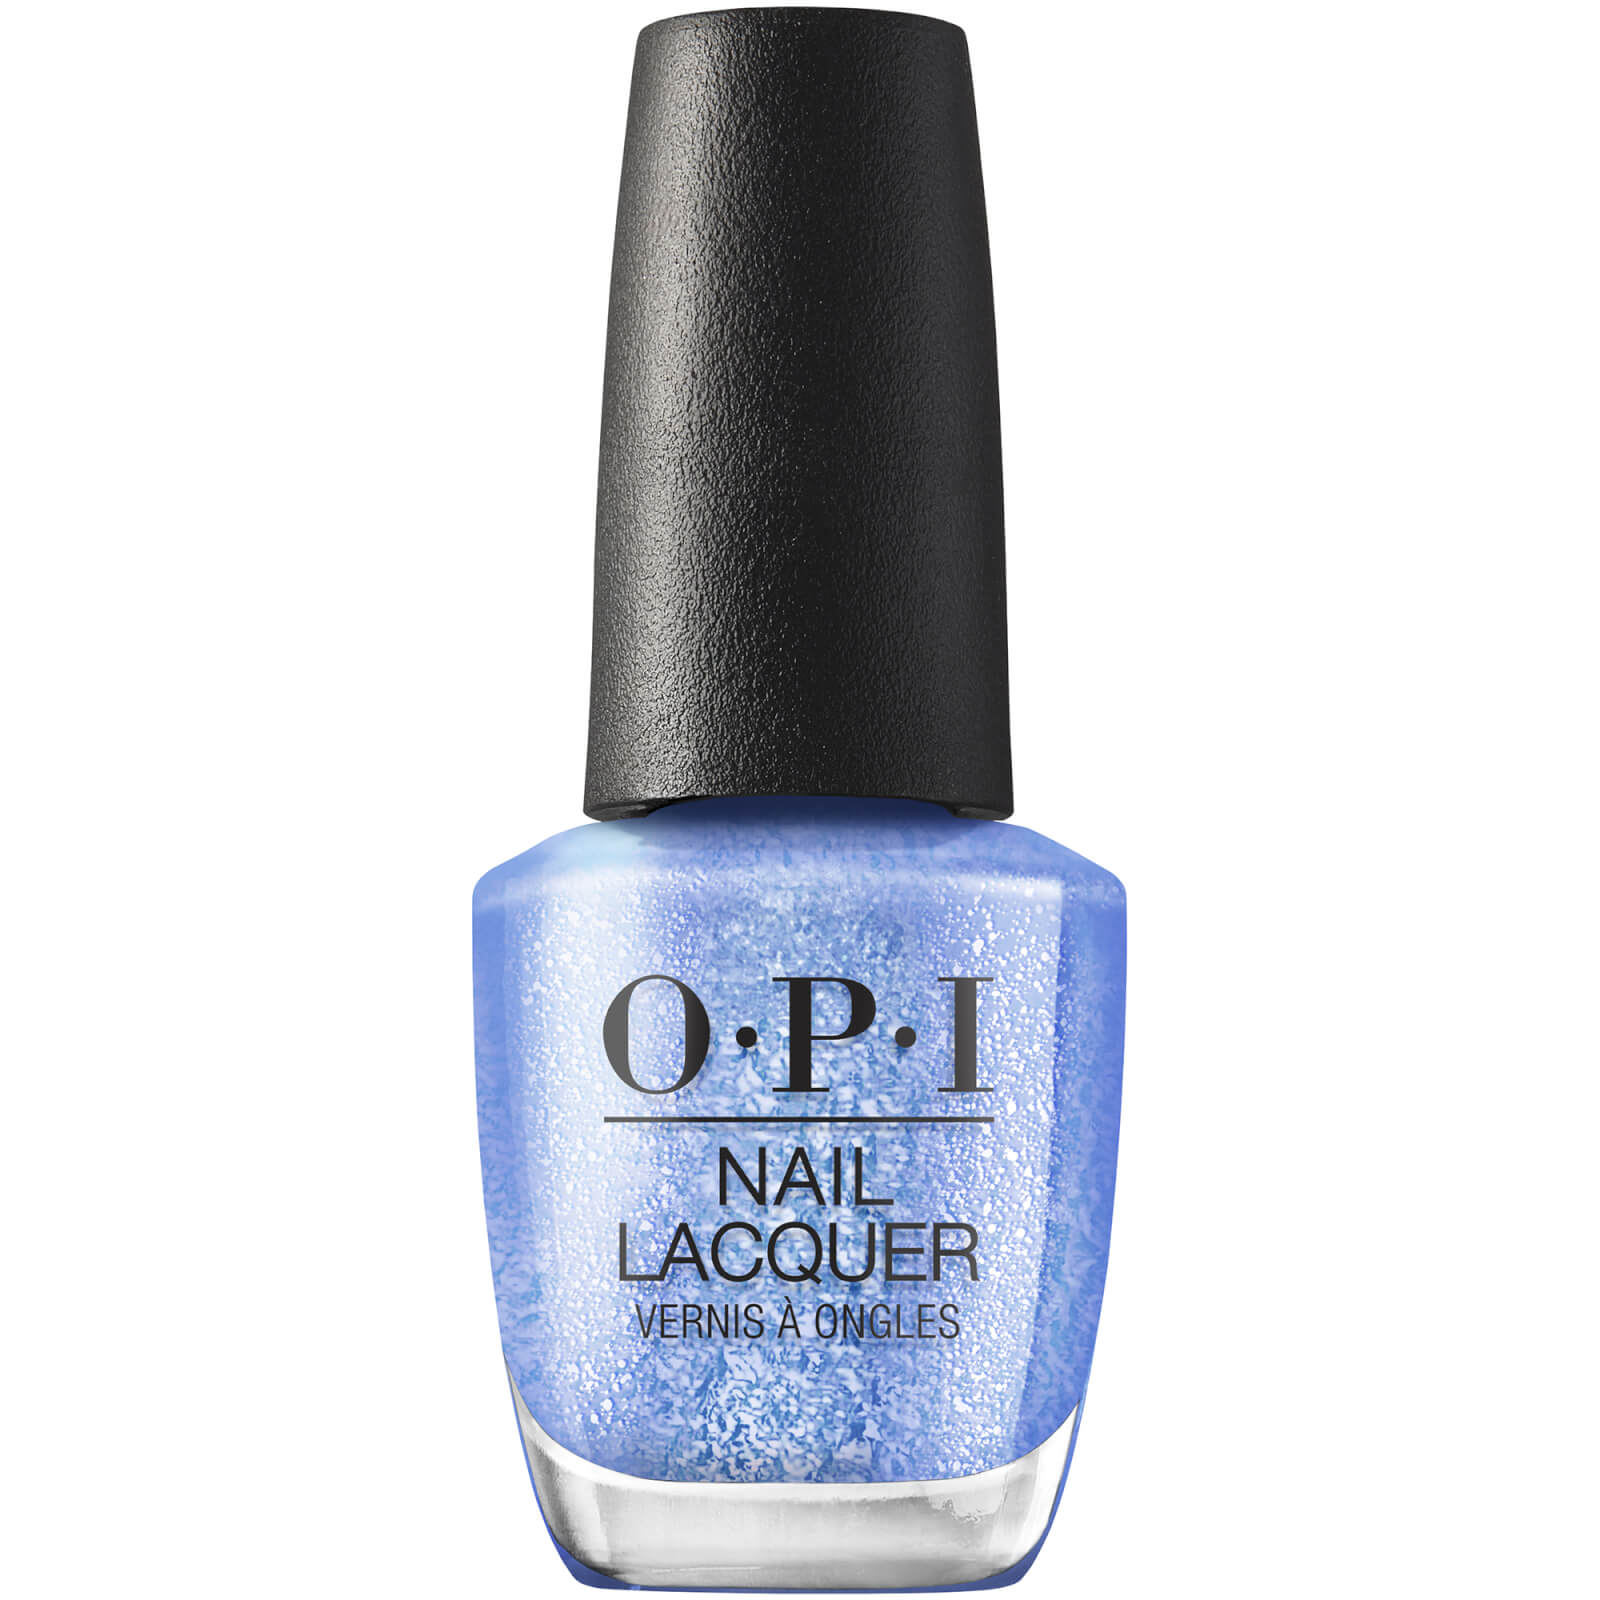 Opi Jewel Be Bold Collection Nail Lacquer 15ml (various Shades) - The Pearl Of Your Dreams